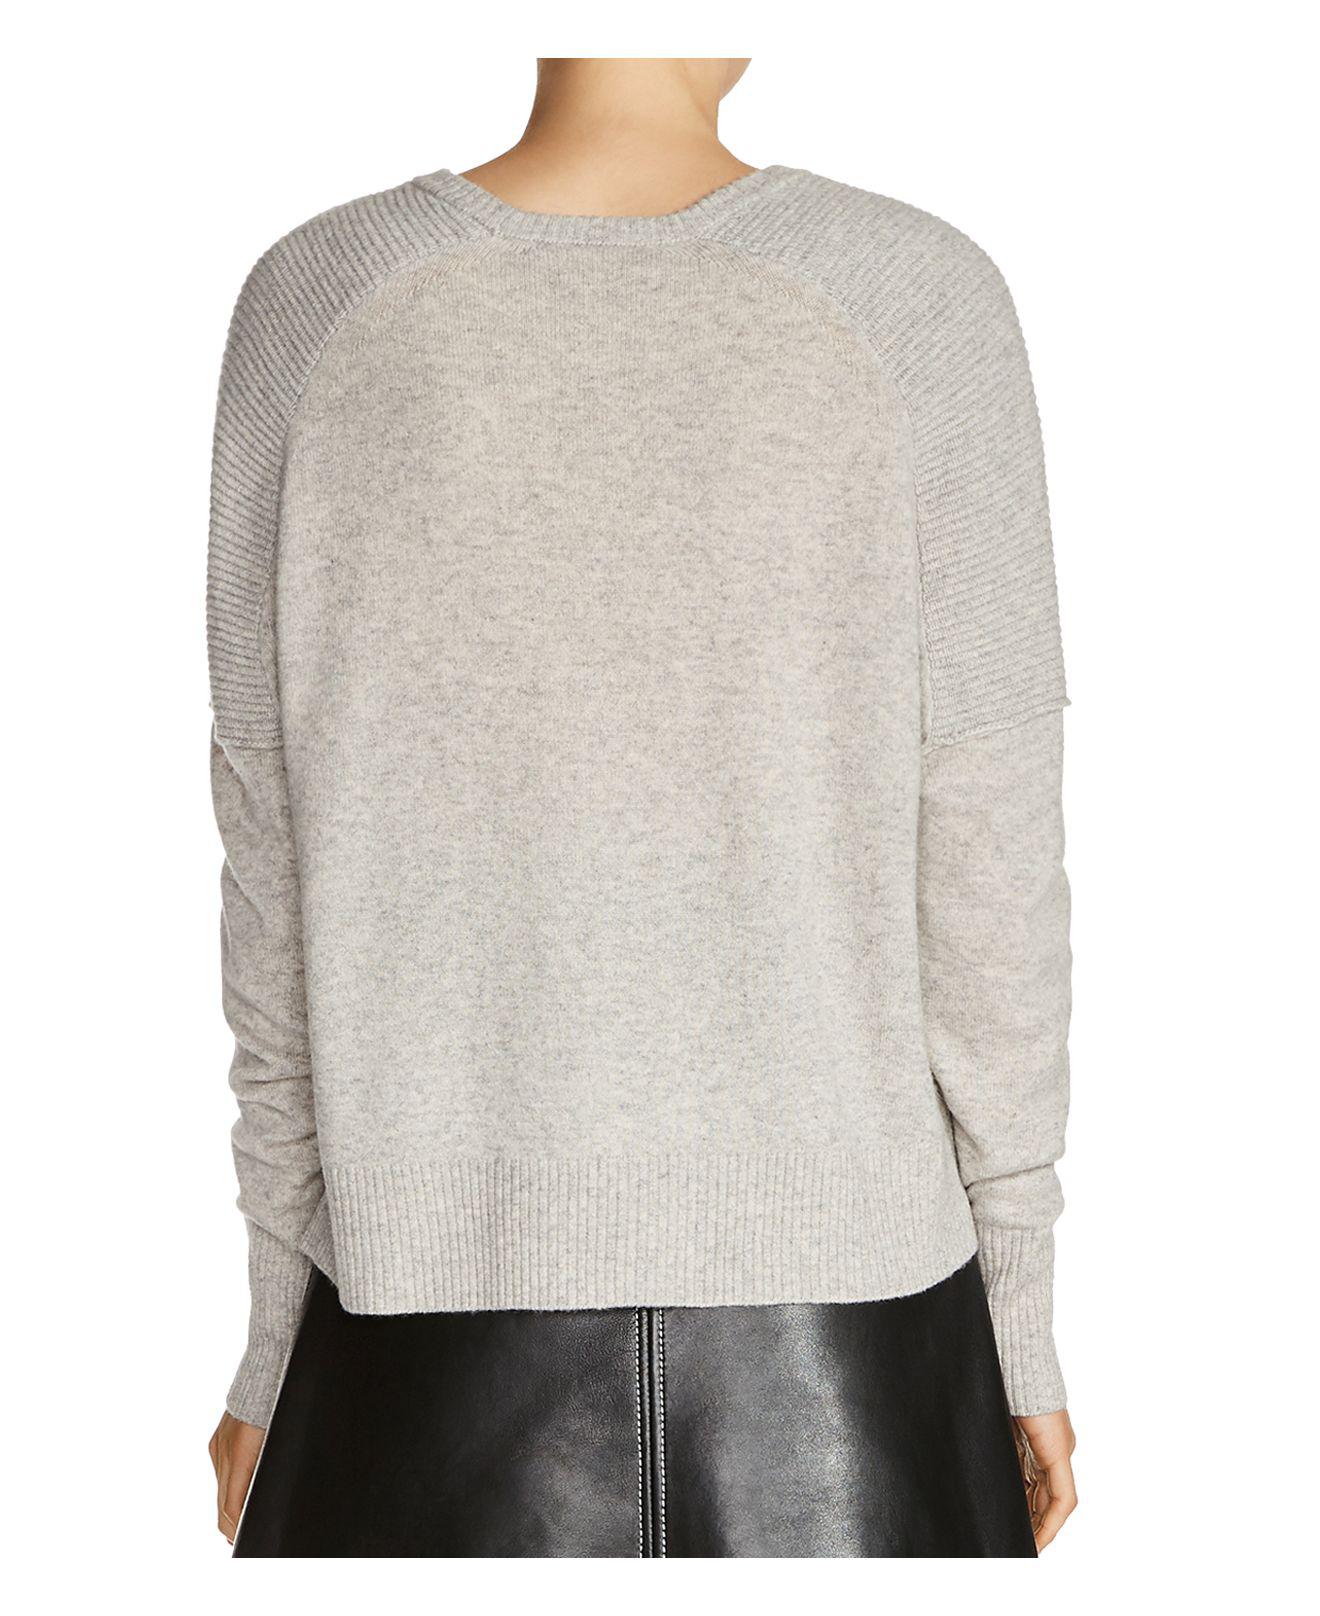 Maje Matisse Cashmere Sweater in Gray - Lyst